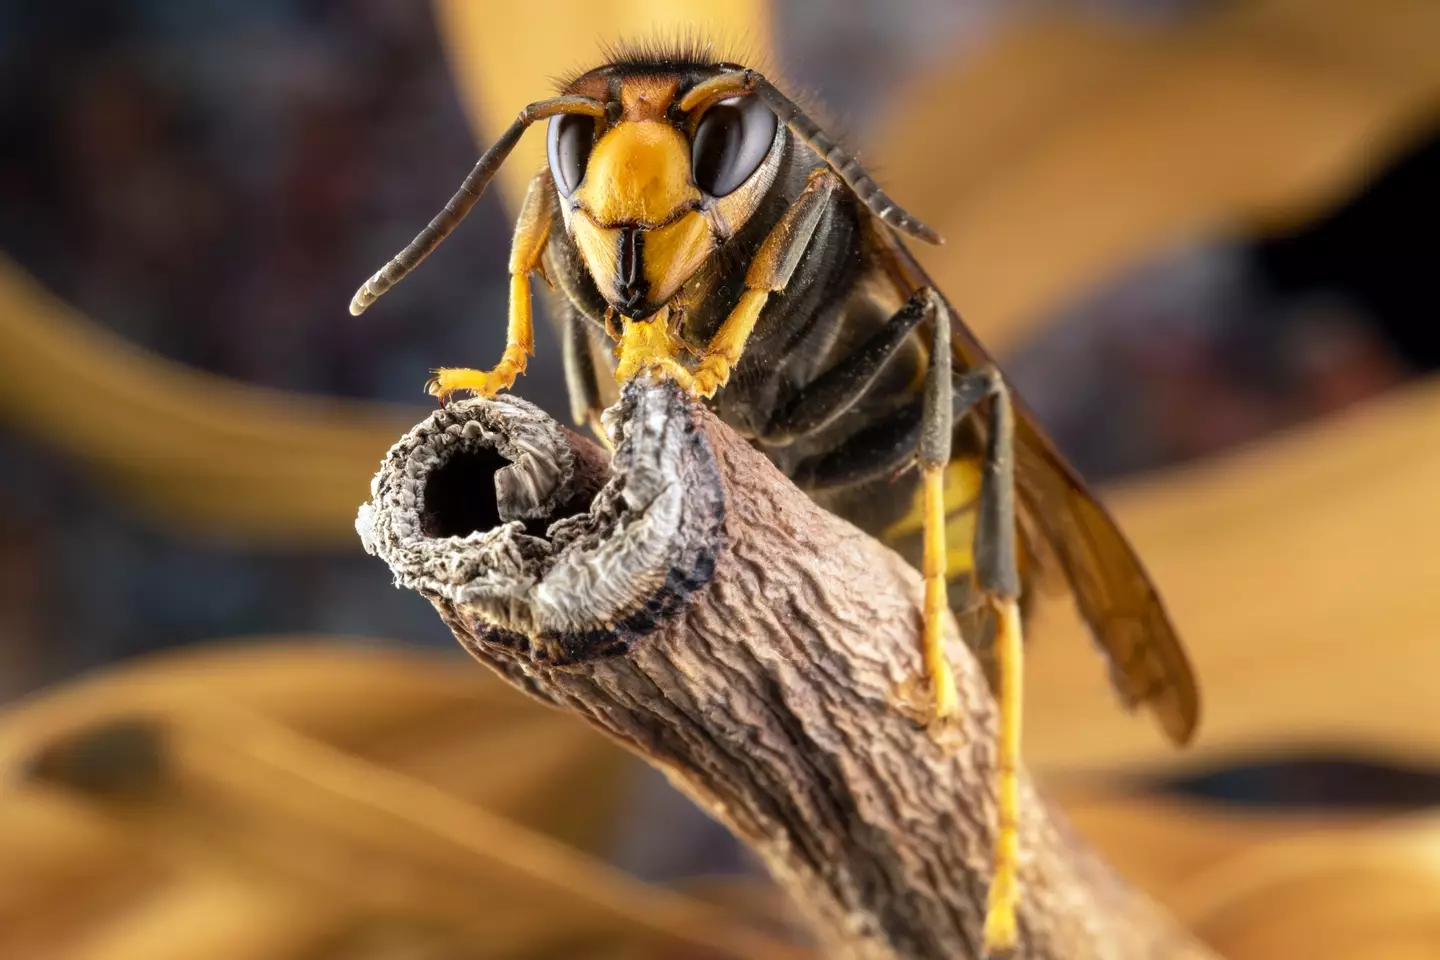 Asian hornets have been spotted in the UK several times this year.